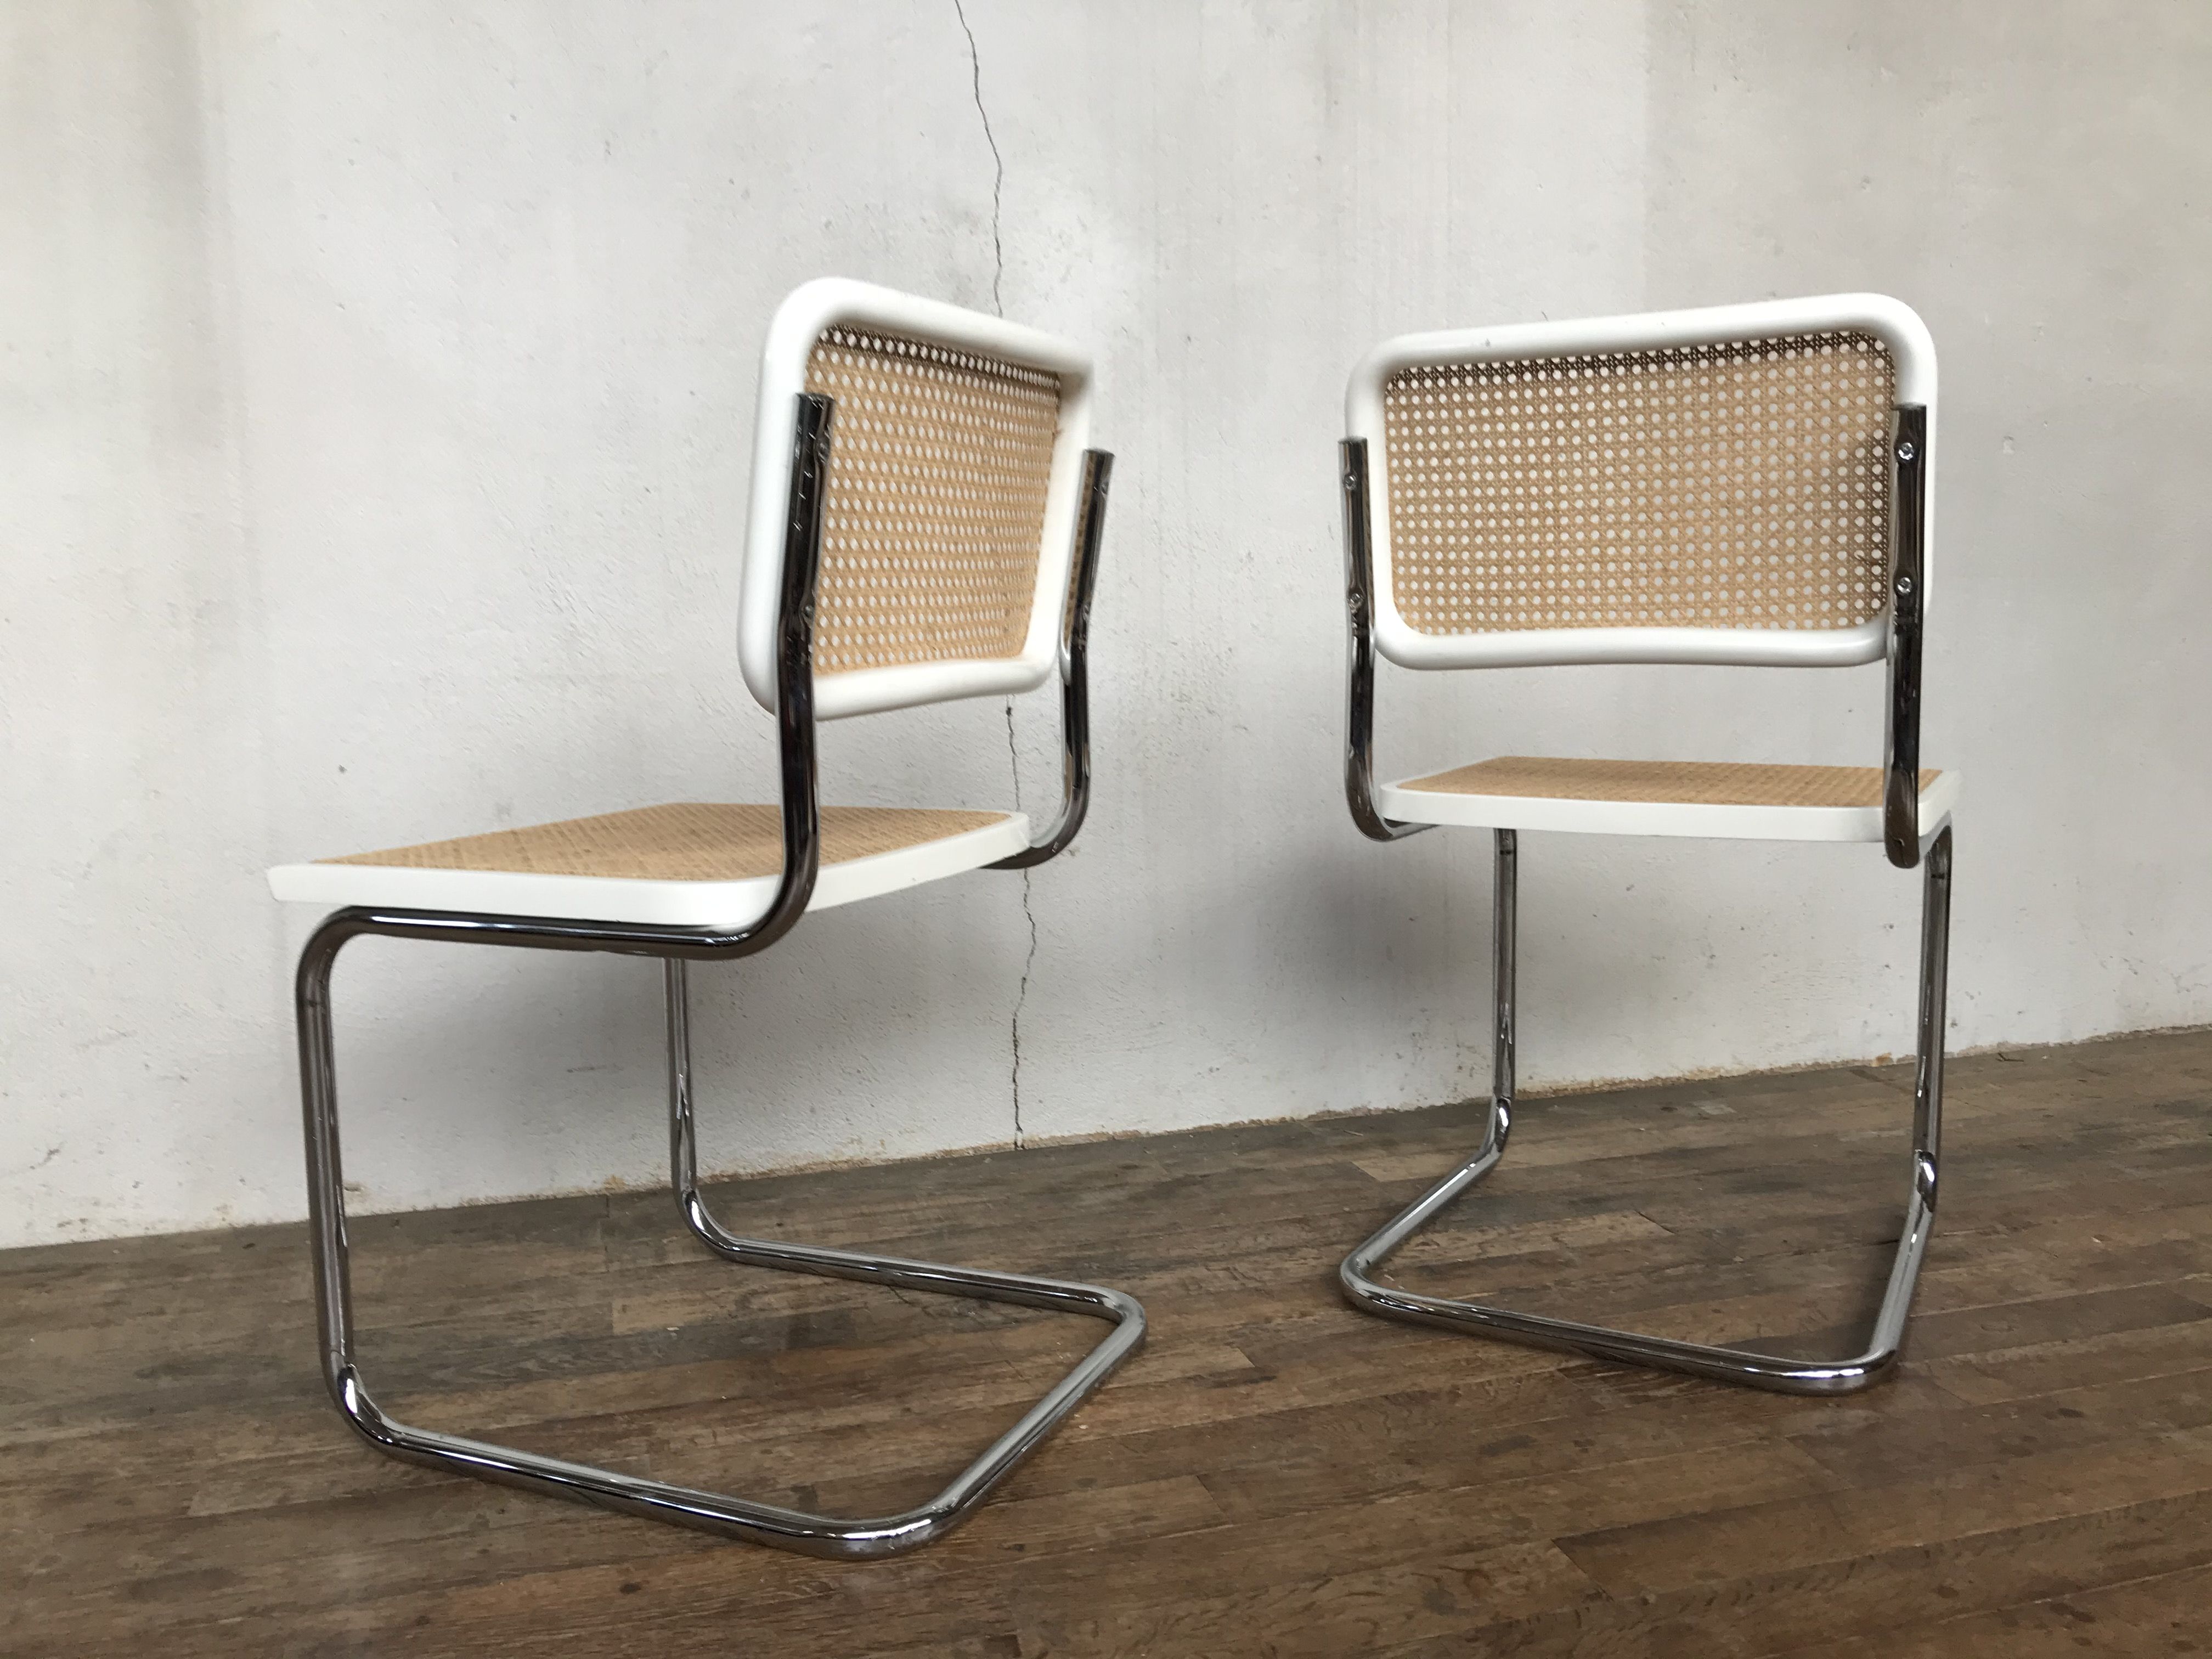 Pair of vintage chairs by Marcel BREUER, 1980 - Design Market